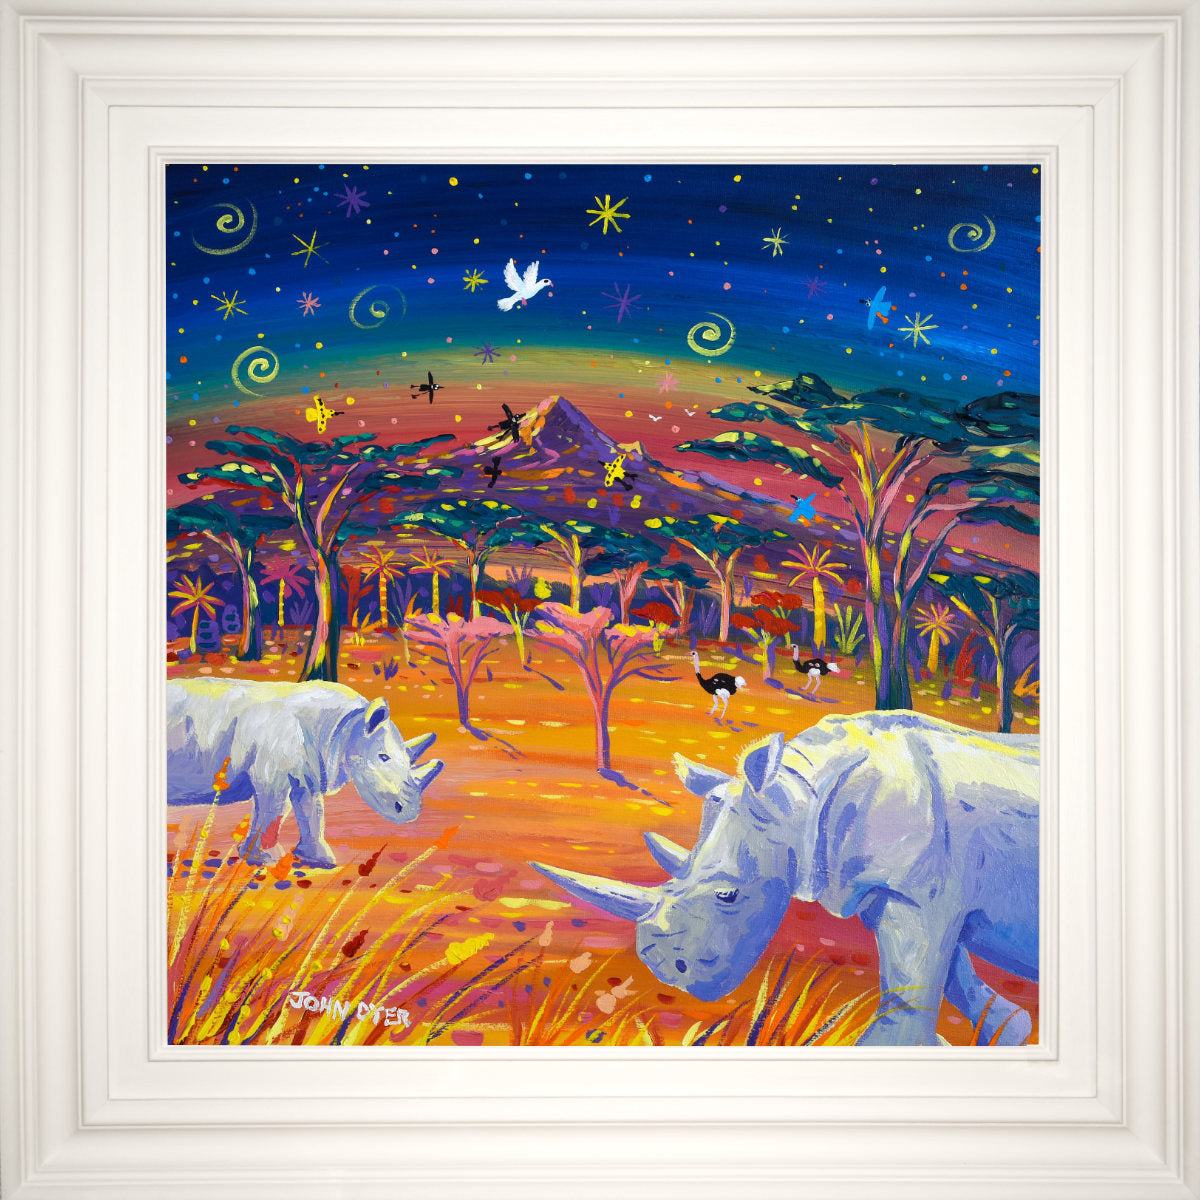 'Rhinos in Paradise, Najin & Fatu, the Last Two Northern White Rhino', 24x24 inches acrylic on canvas. African Painting by British Artist John Dyer.